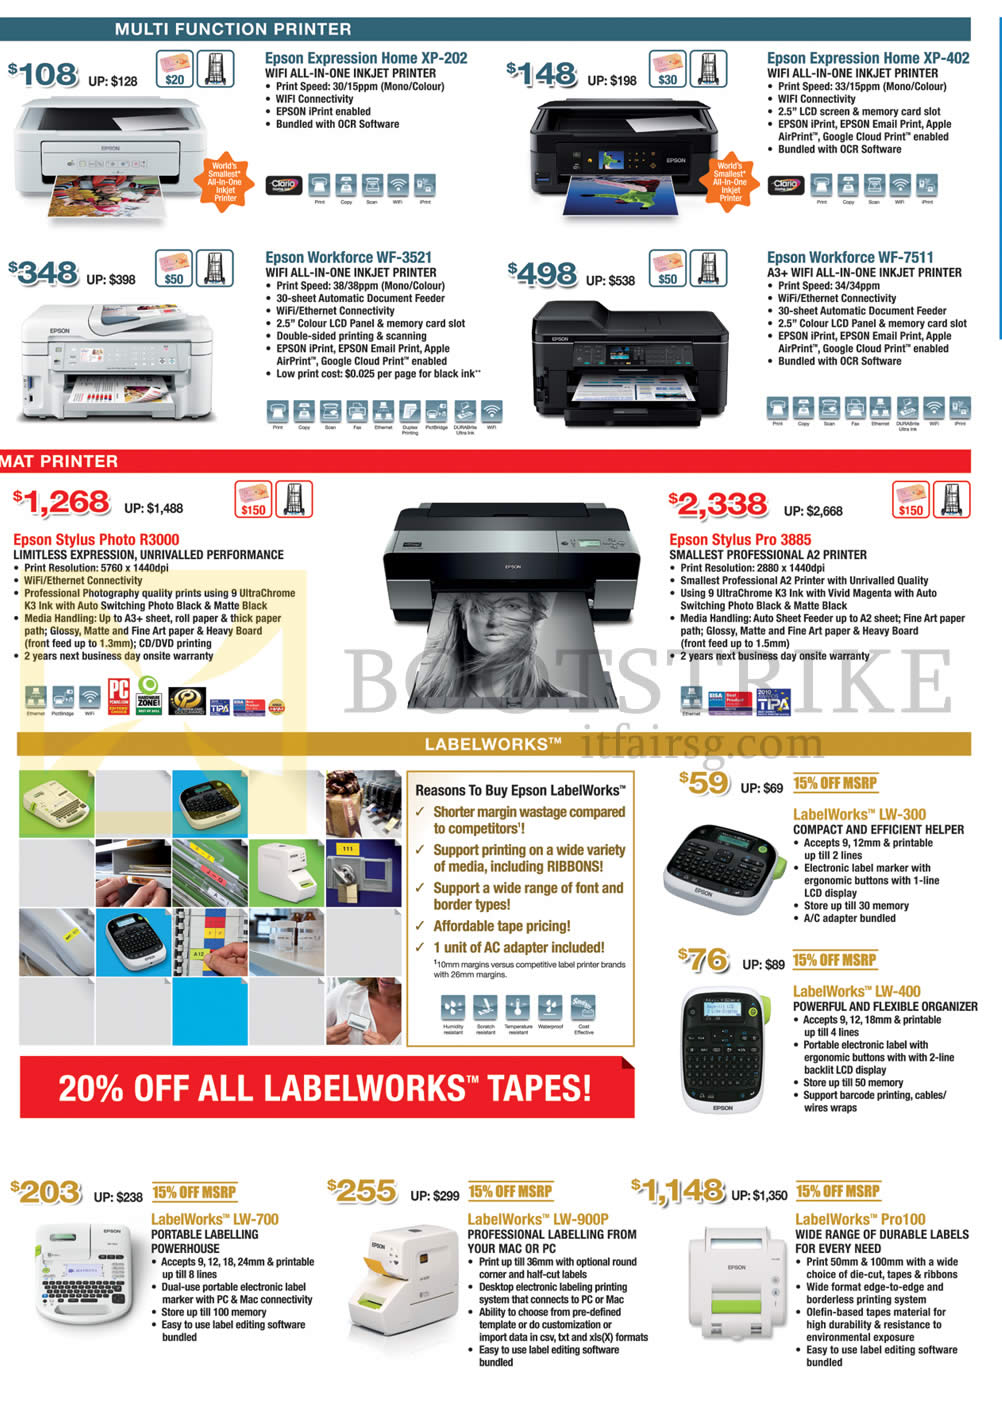 IT SHOW 2014 price list image brochure of Epson Printers Inkjet Labellers Expression Home XP-202, 402, Workforce WF-3521, 7511, Stylus Photo R3000, Pro 3685, Labelworks LW-300, 400, 700, 900P, Pro100